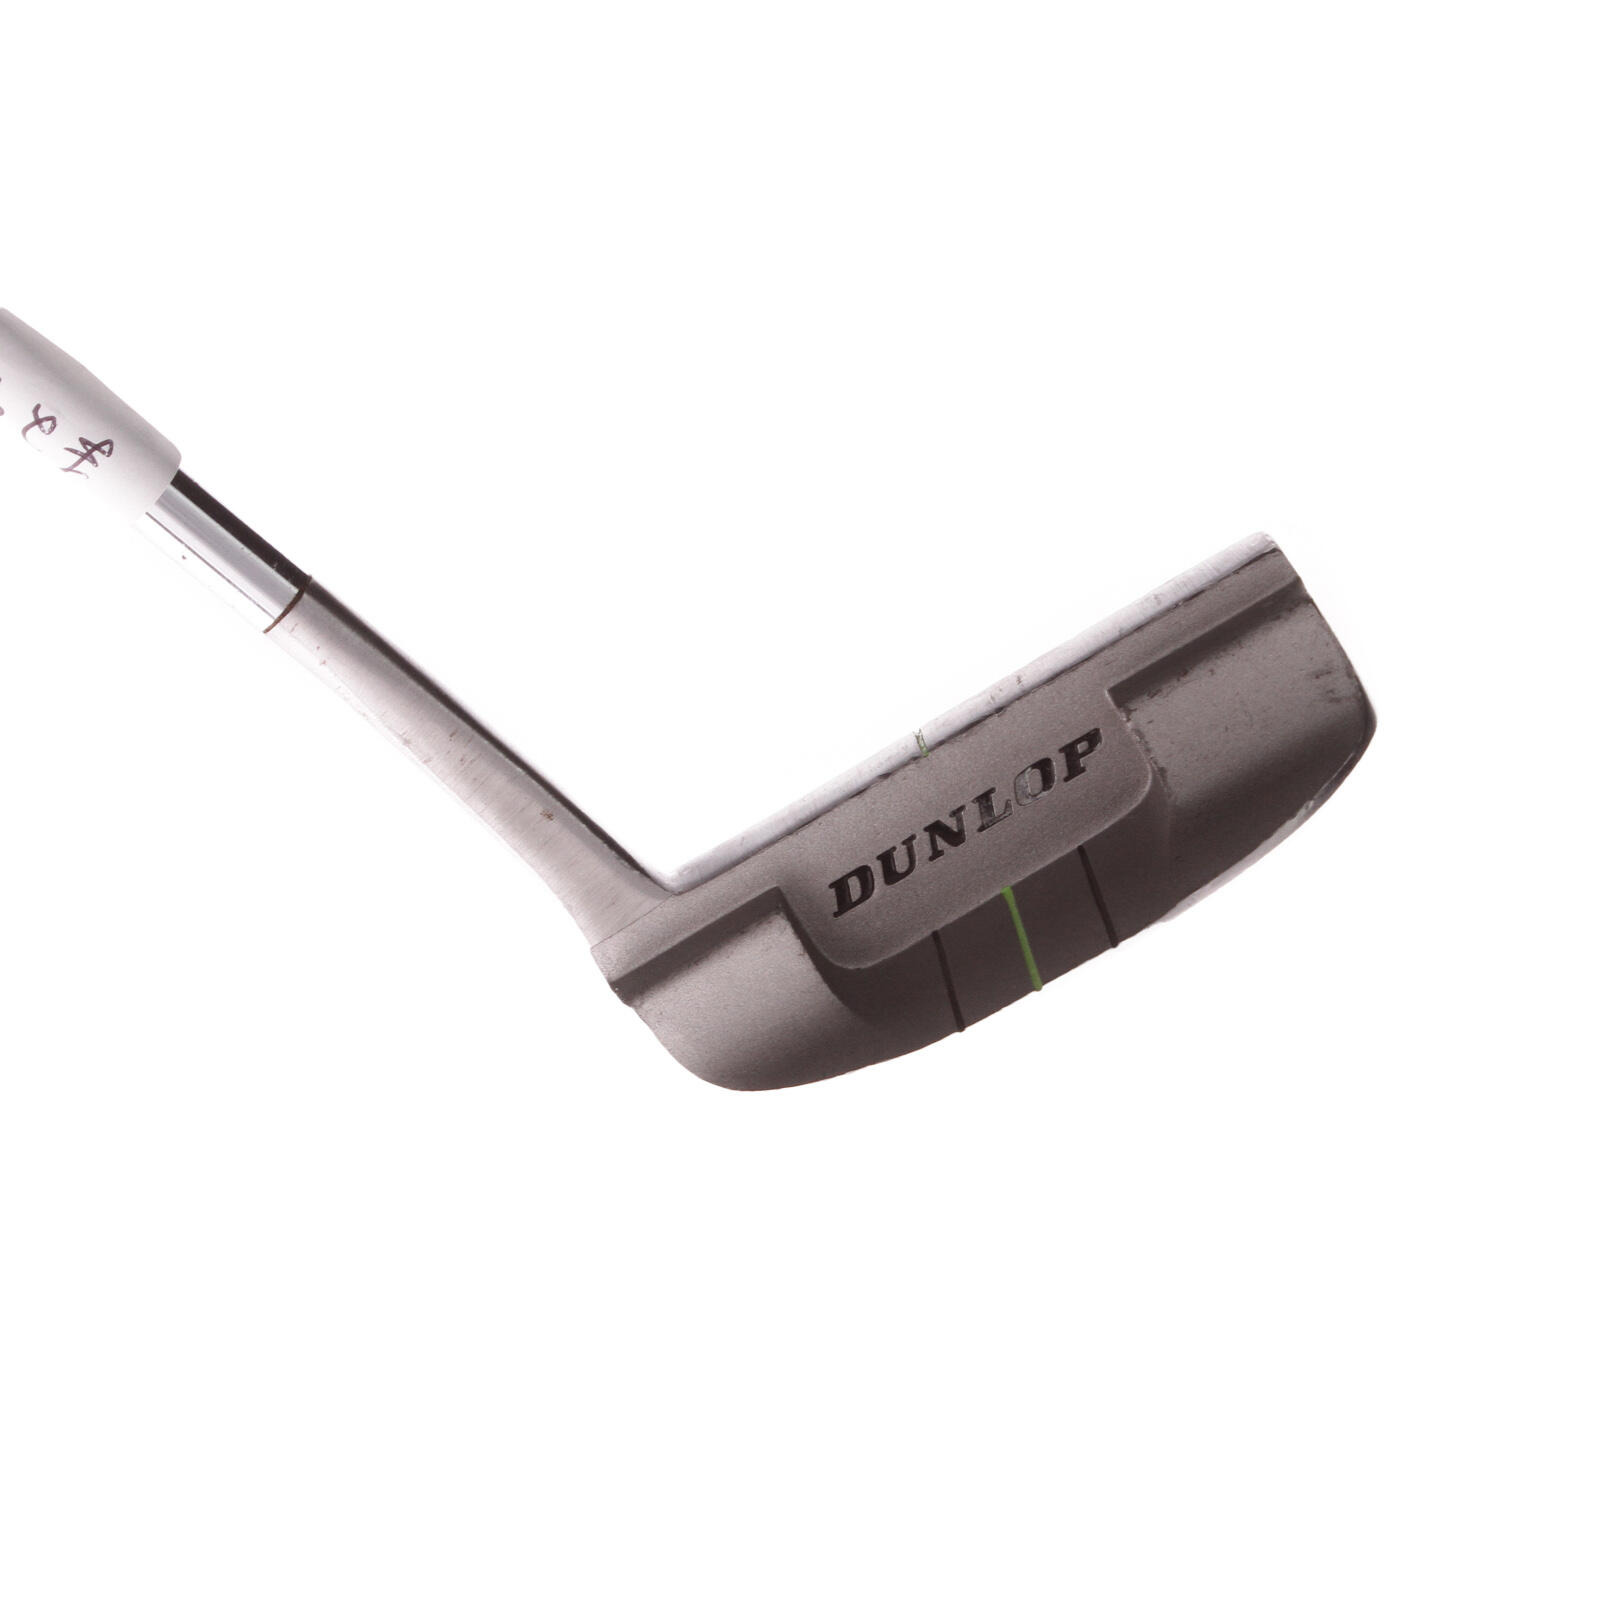 USED - Dunlop NZ9 Putter 33 Inches Length Steel Shaft Right Handed - GRADE B 4/6